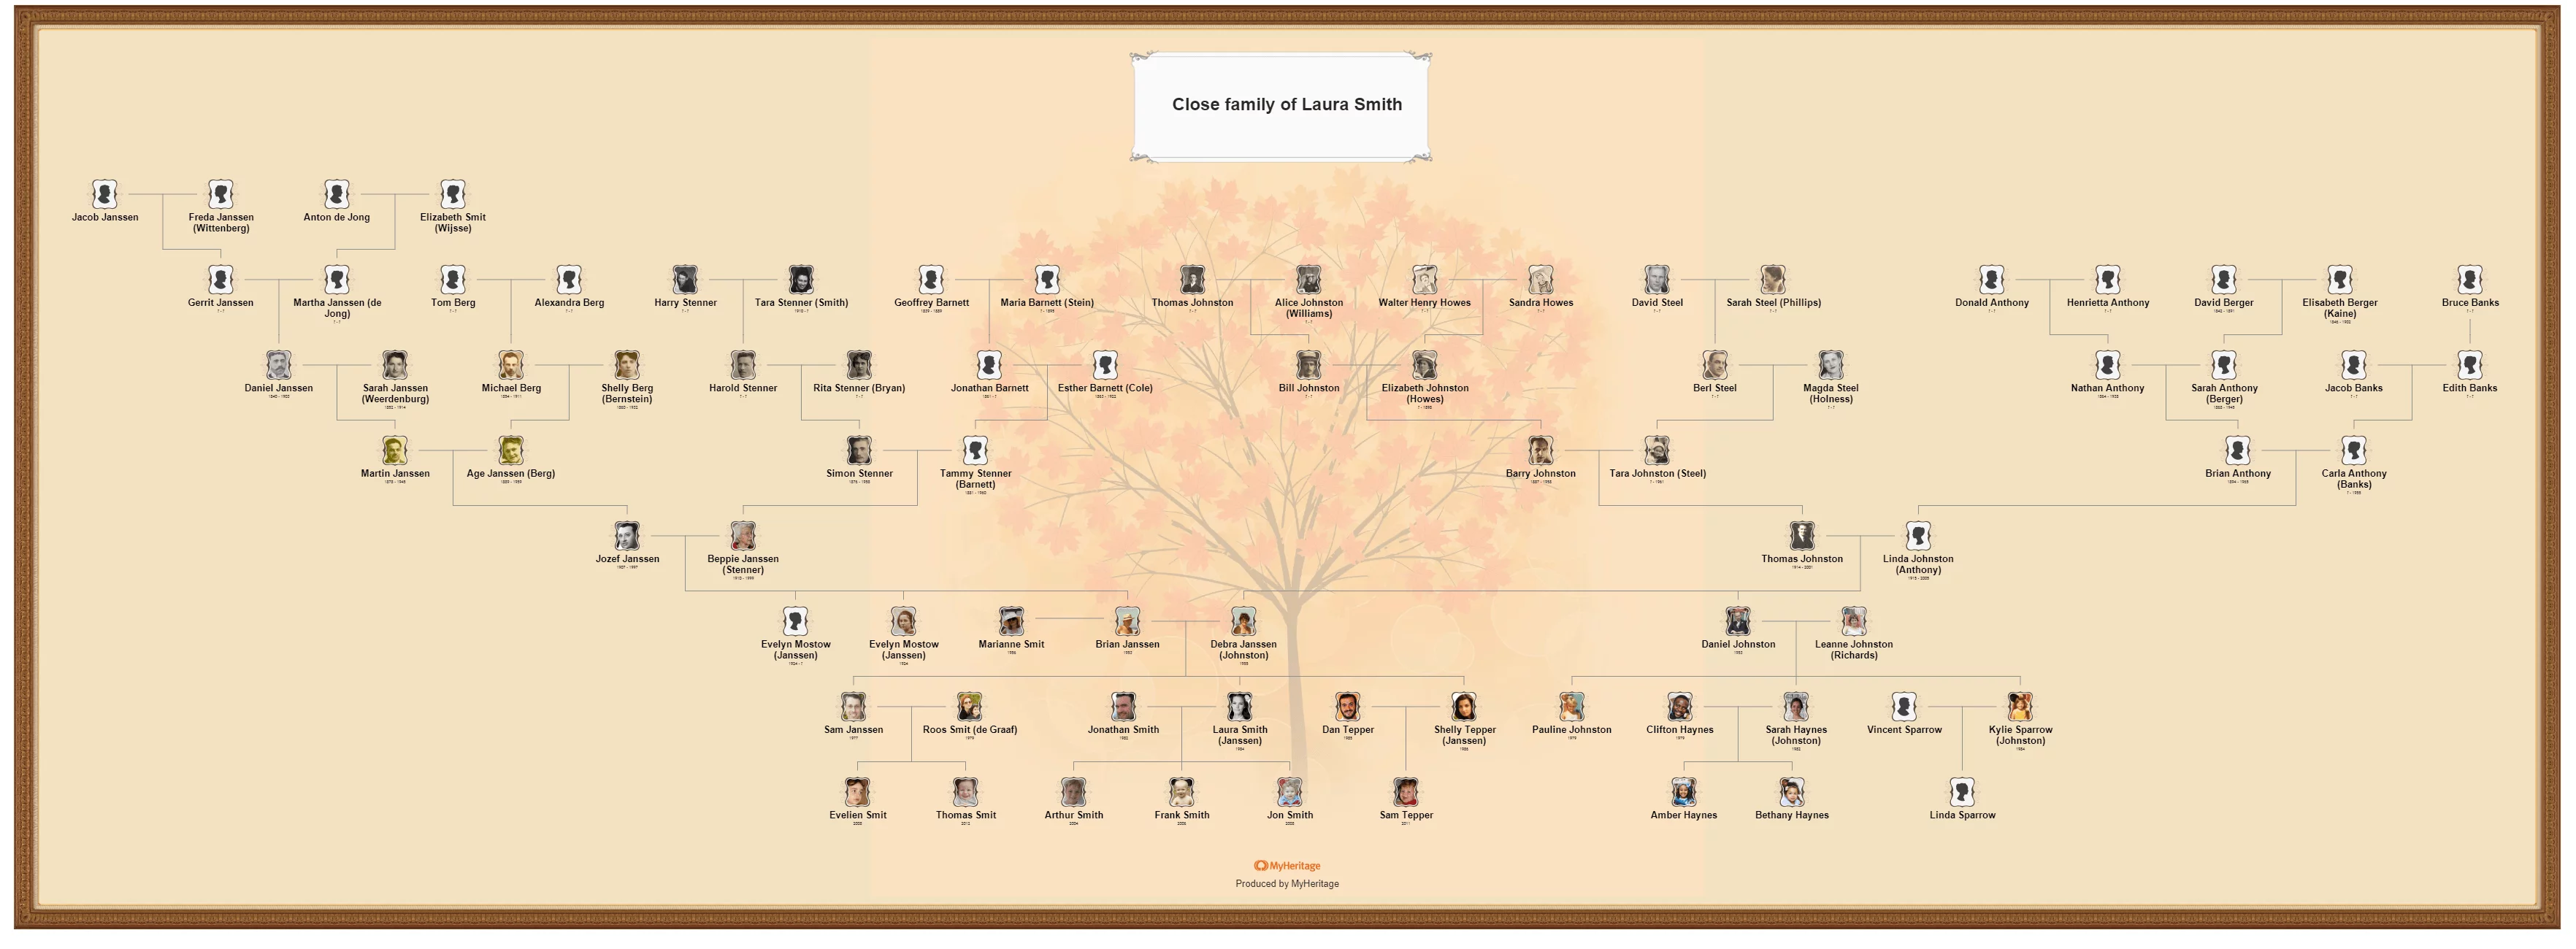 How to Make a Family Tree Chart: Close family chart